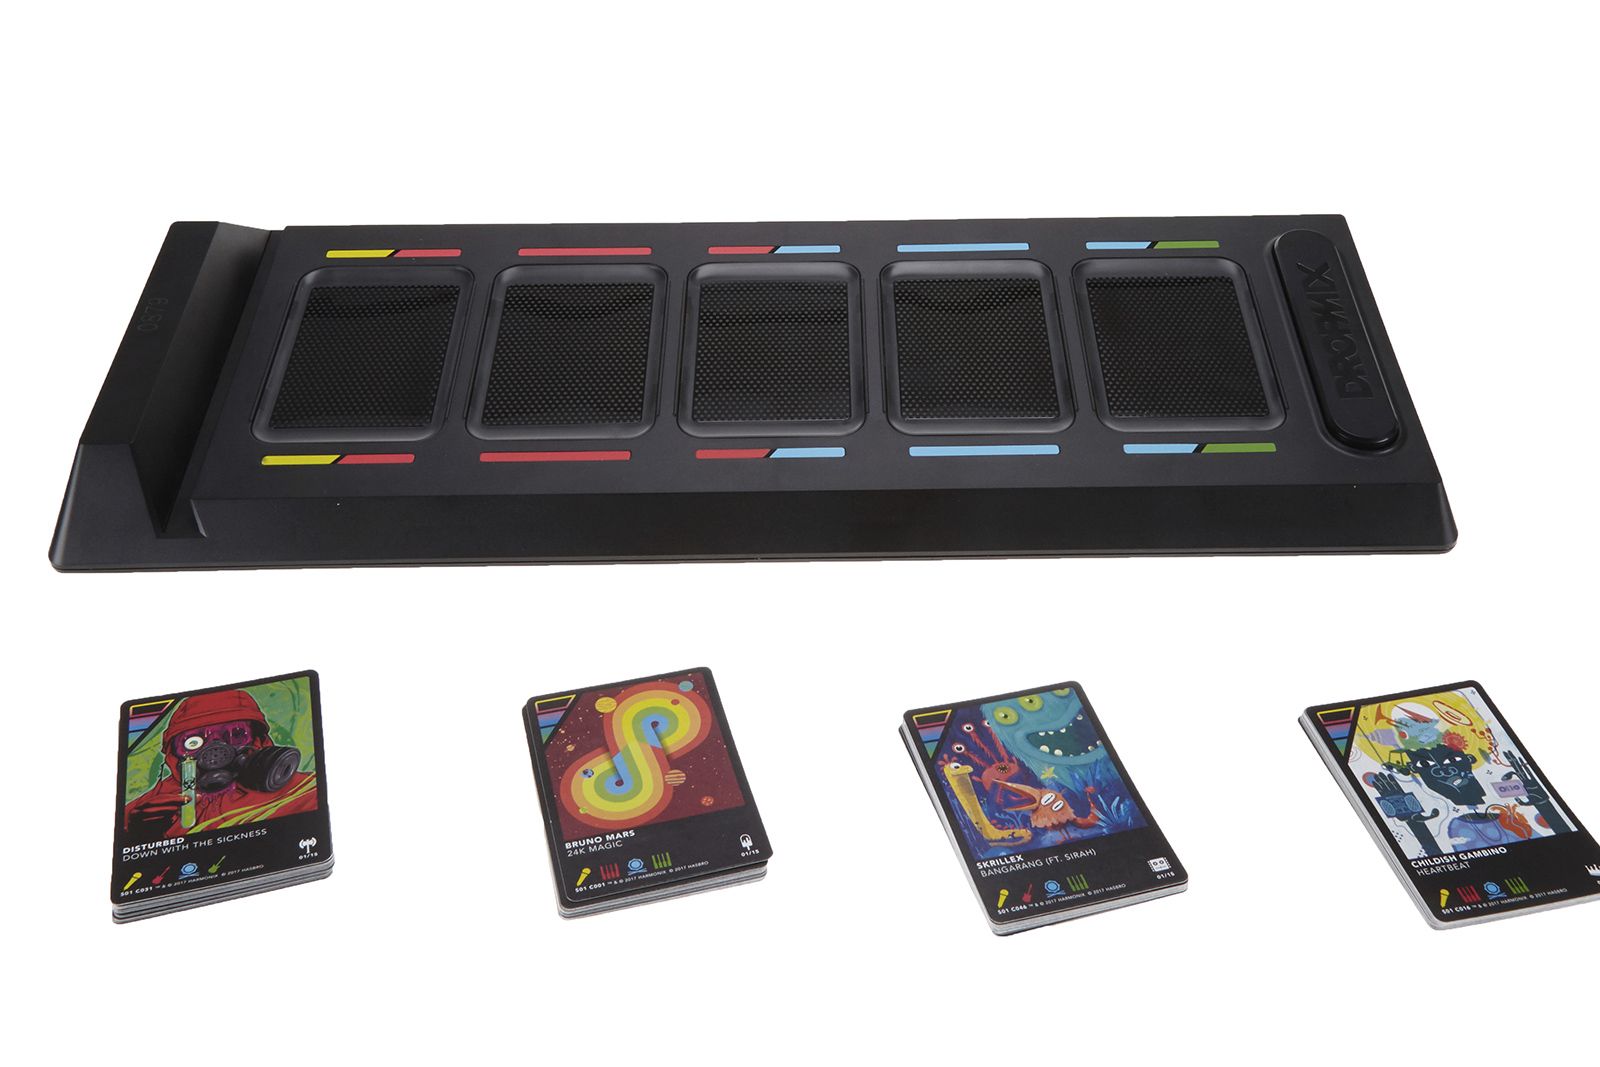 DropMix is the playing card game that transforms you into a DJ image 1